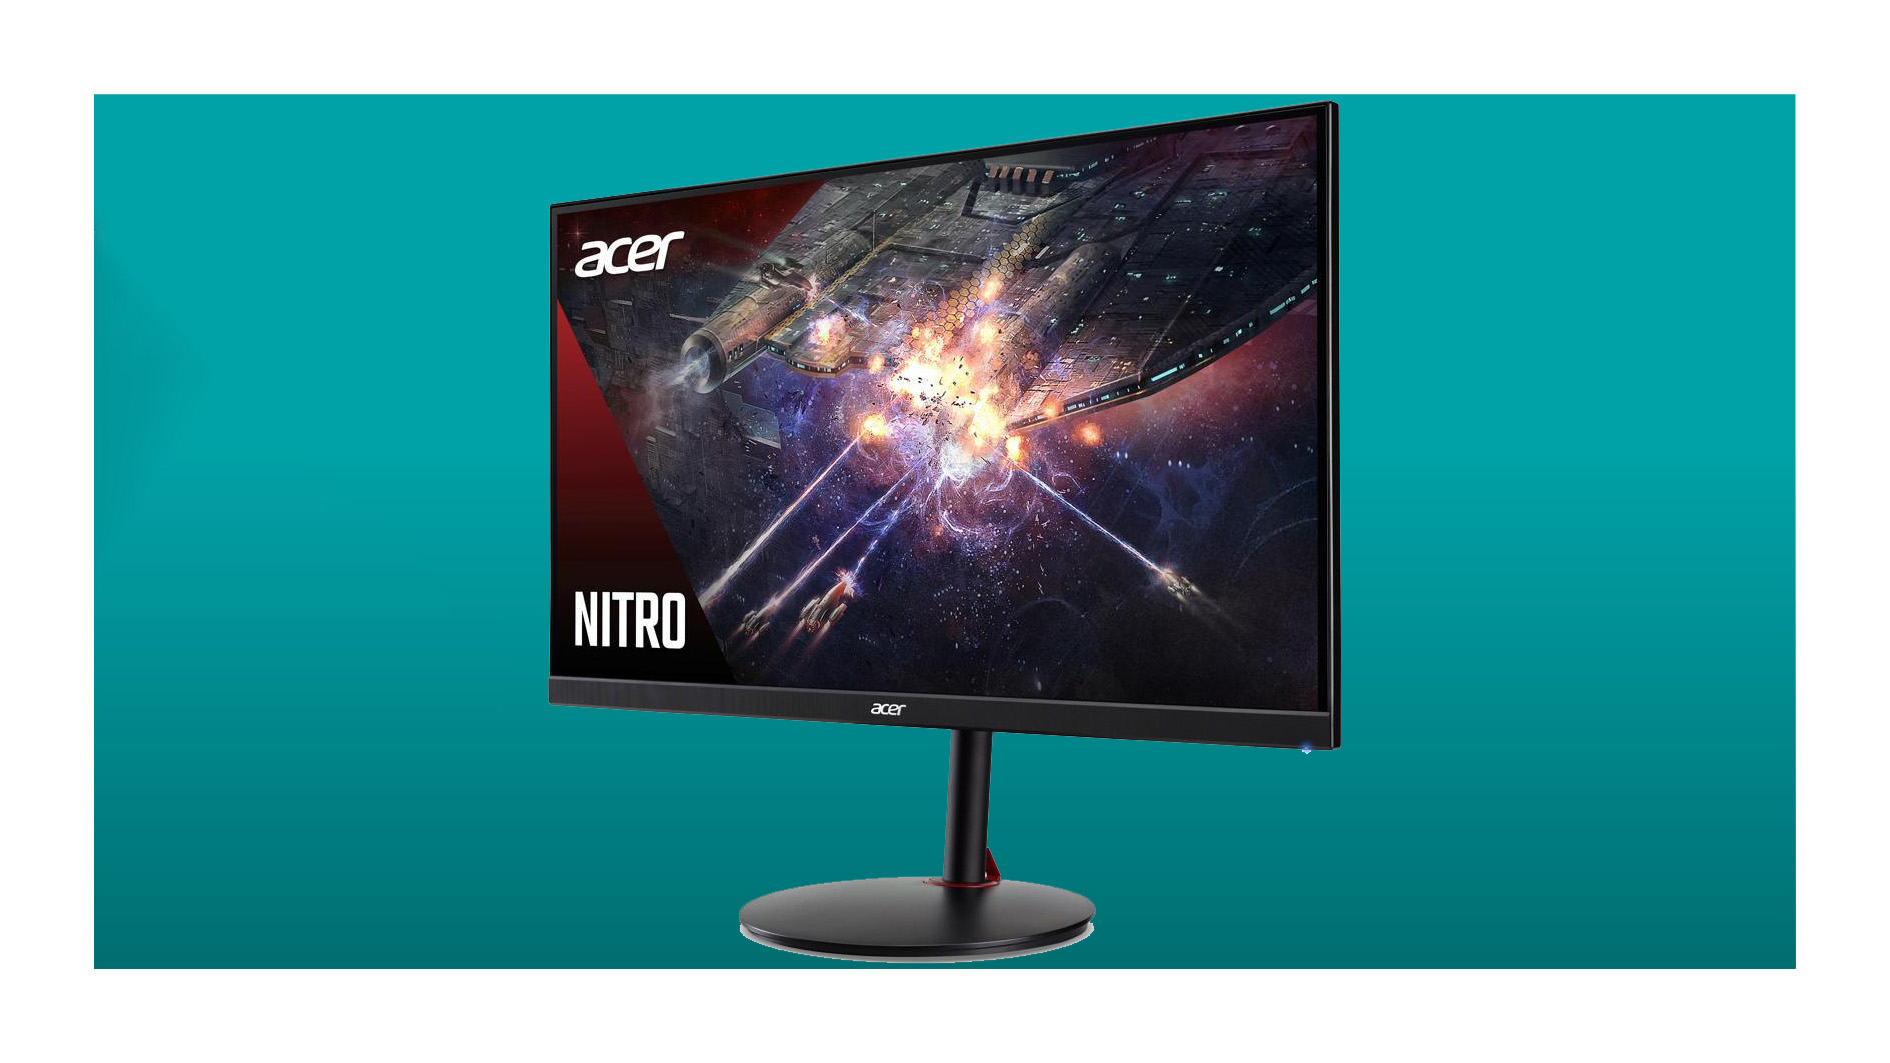 Pick up this deceptively speedy 280Hz gaming monitor for just $200